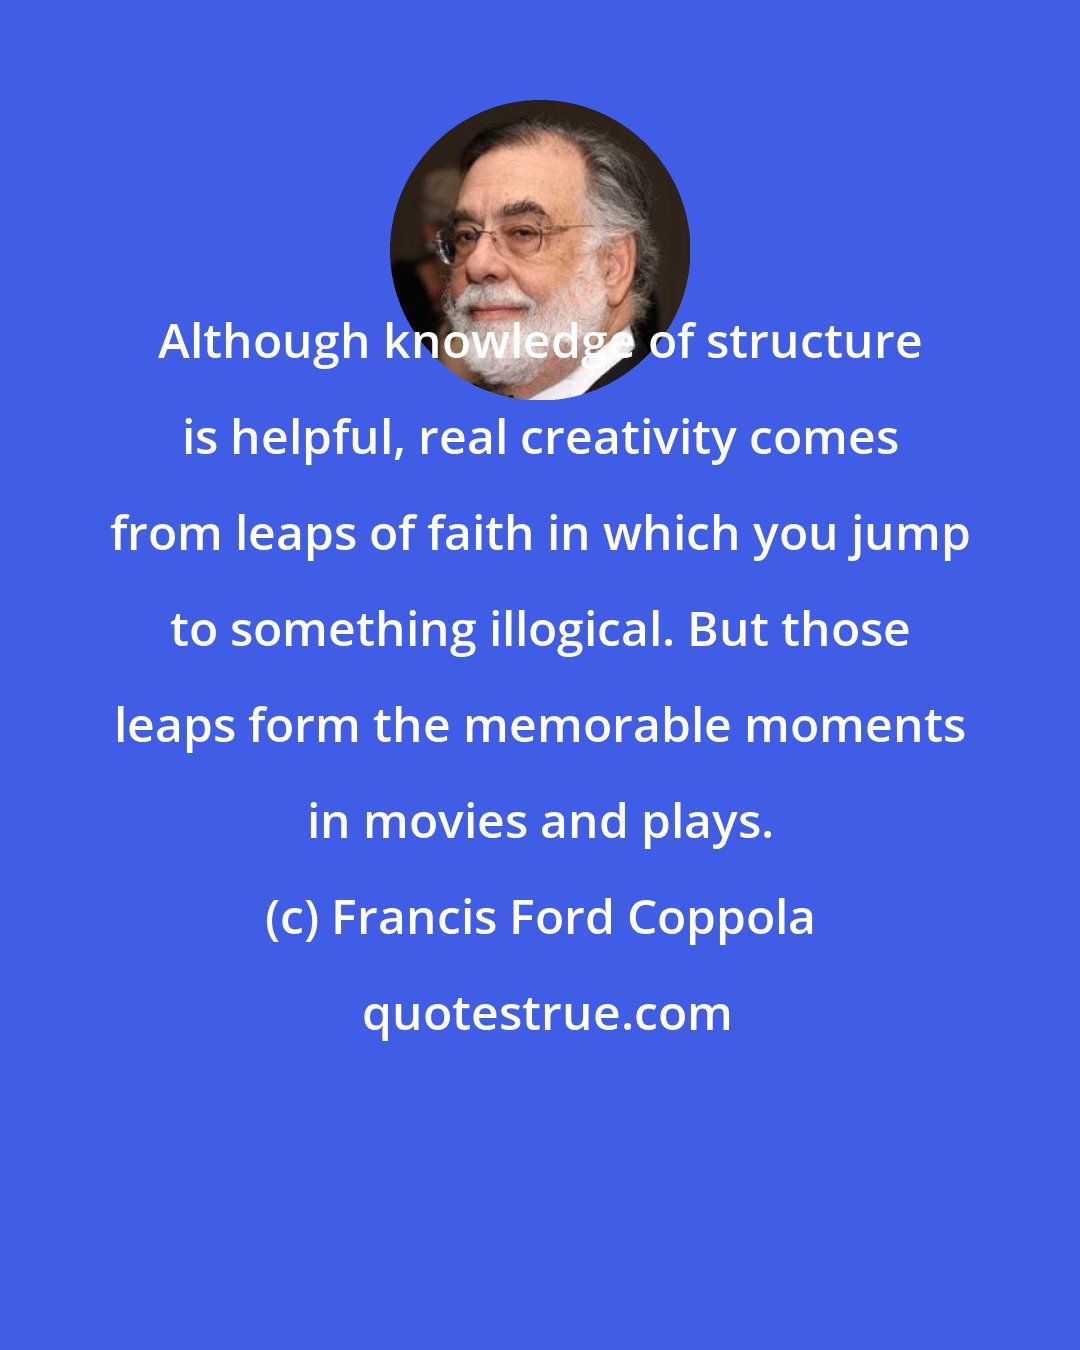 Francis Ford Coppola: Although knowledge of structure is helpful, real creativity comes from leaps of faith in which you jump to something illogical. But those leaps form the memorable moments in movies and plays.